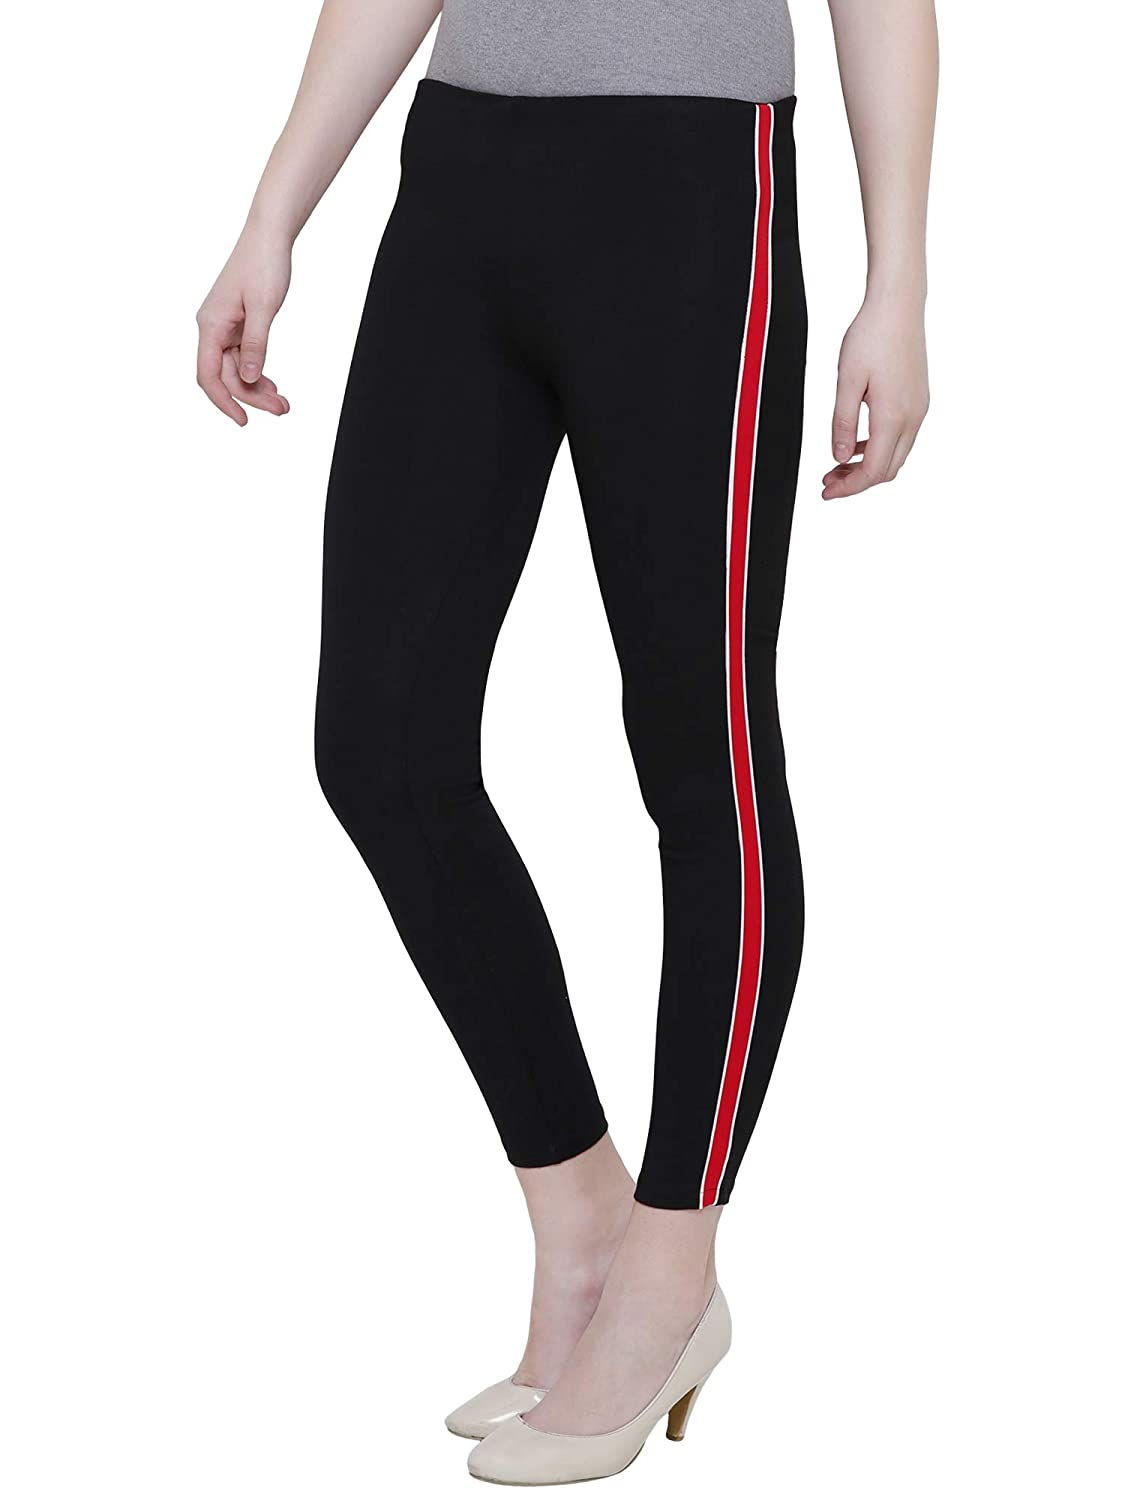 Trackpants for Womens | Gym wear Leggings Pack Of 2 - Combodunia